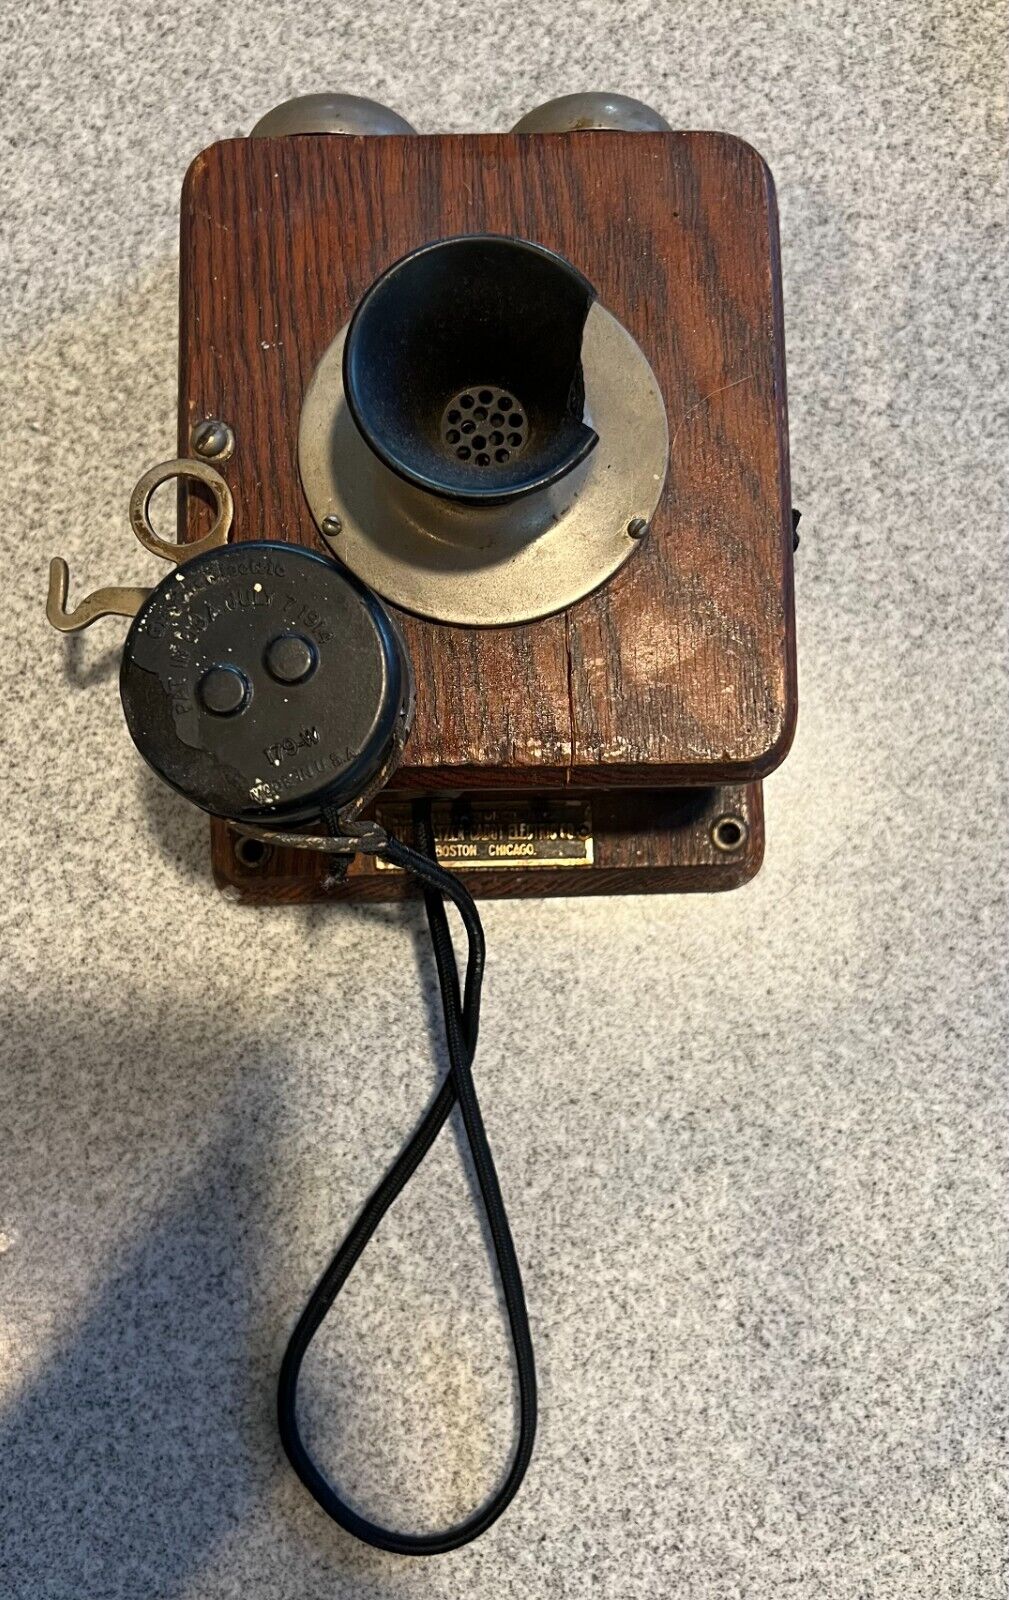 Vintage Graybar Electric Telephone, manufactured by The Holtzer-Cabot Electric